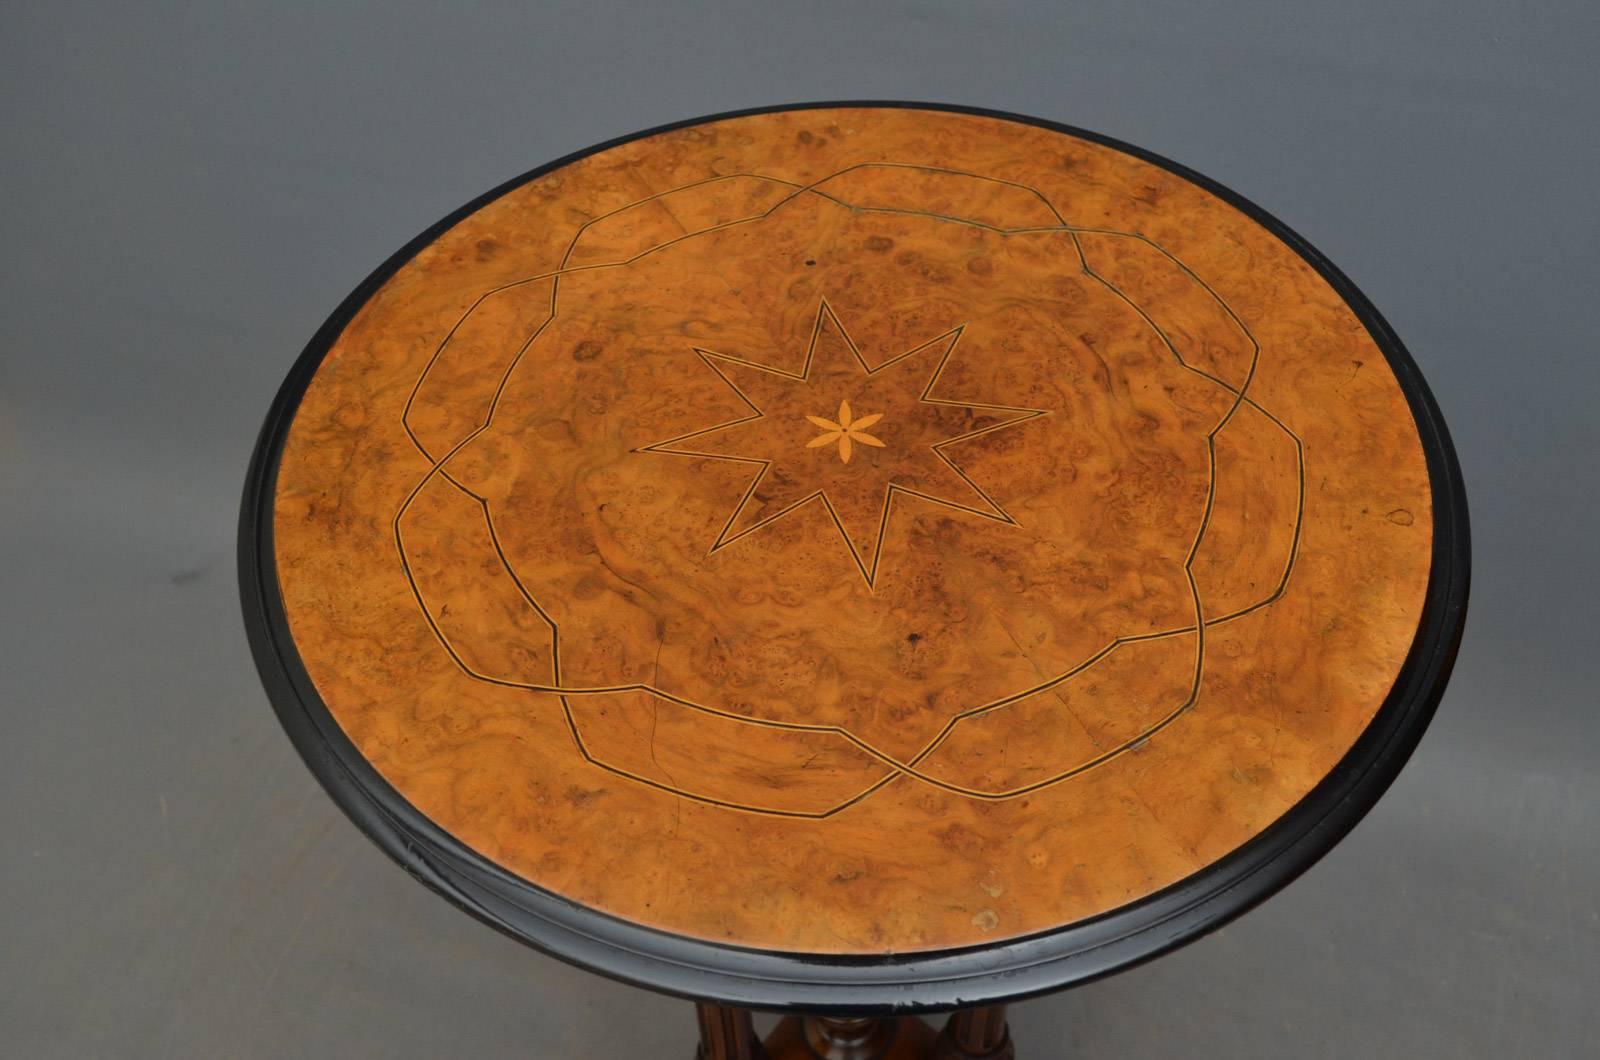 Sn4291, fine quality Victorian occasional table, having burr walnut top with string inlaid decoration, moulded and ebonised edge and 3 turned, reeded and carved legs terminating in carved and downswept feet. This antique table retains its original